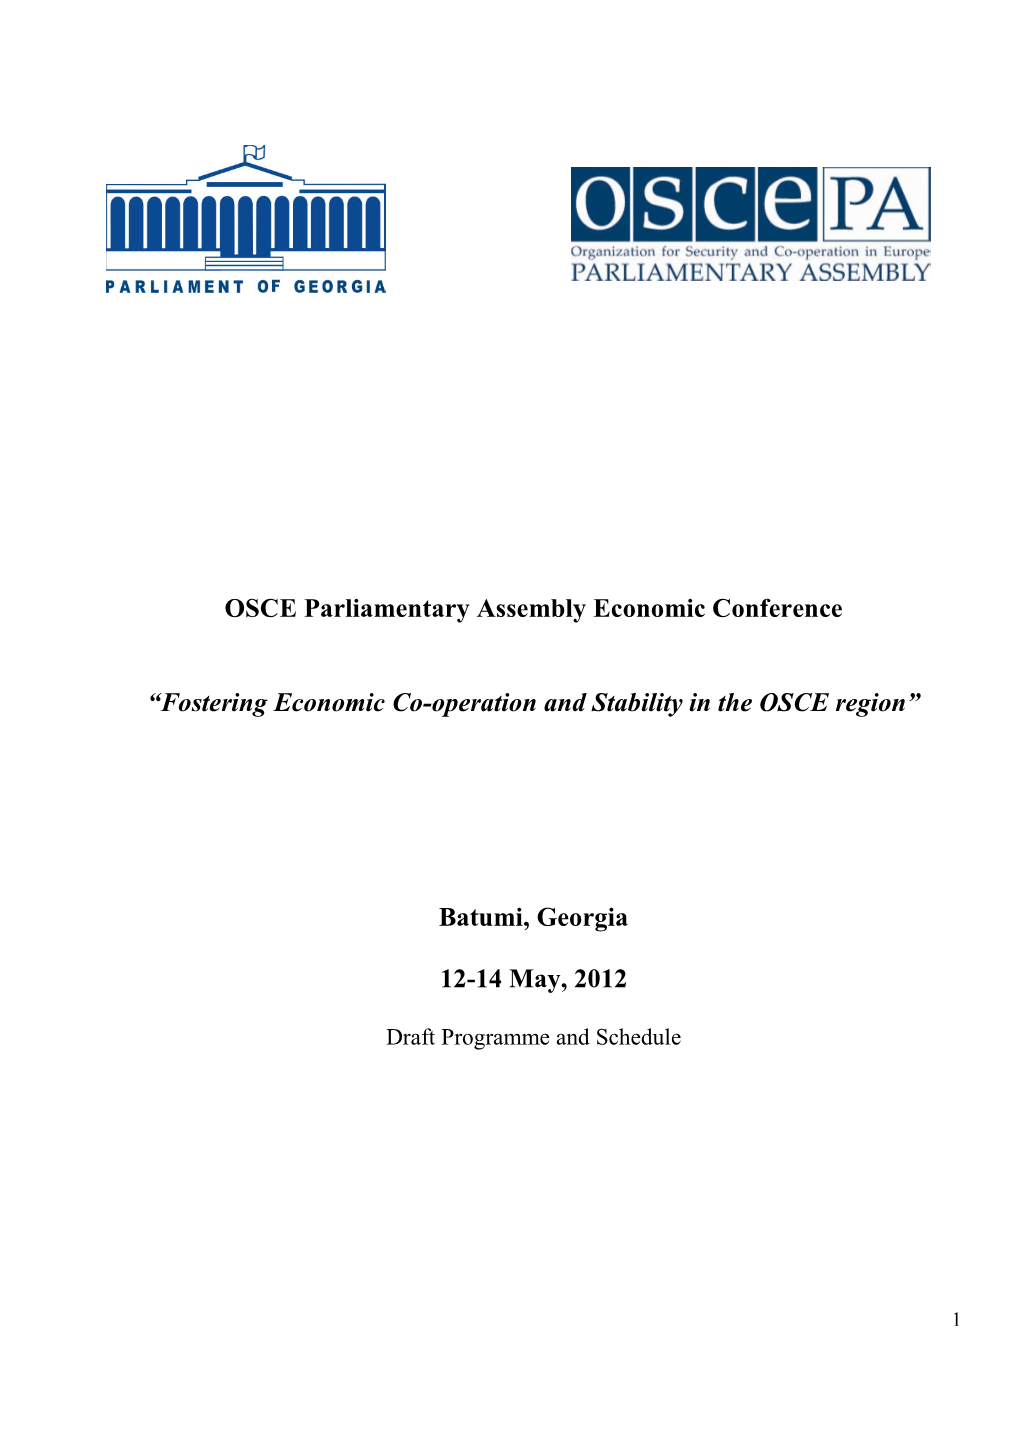 OSCE Parliamentary Assembly Economic Conference “Fostering